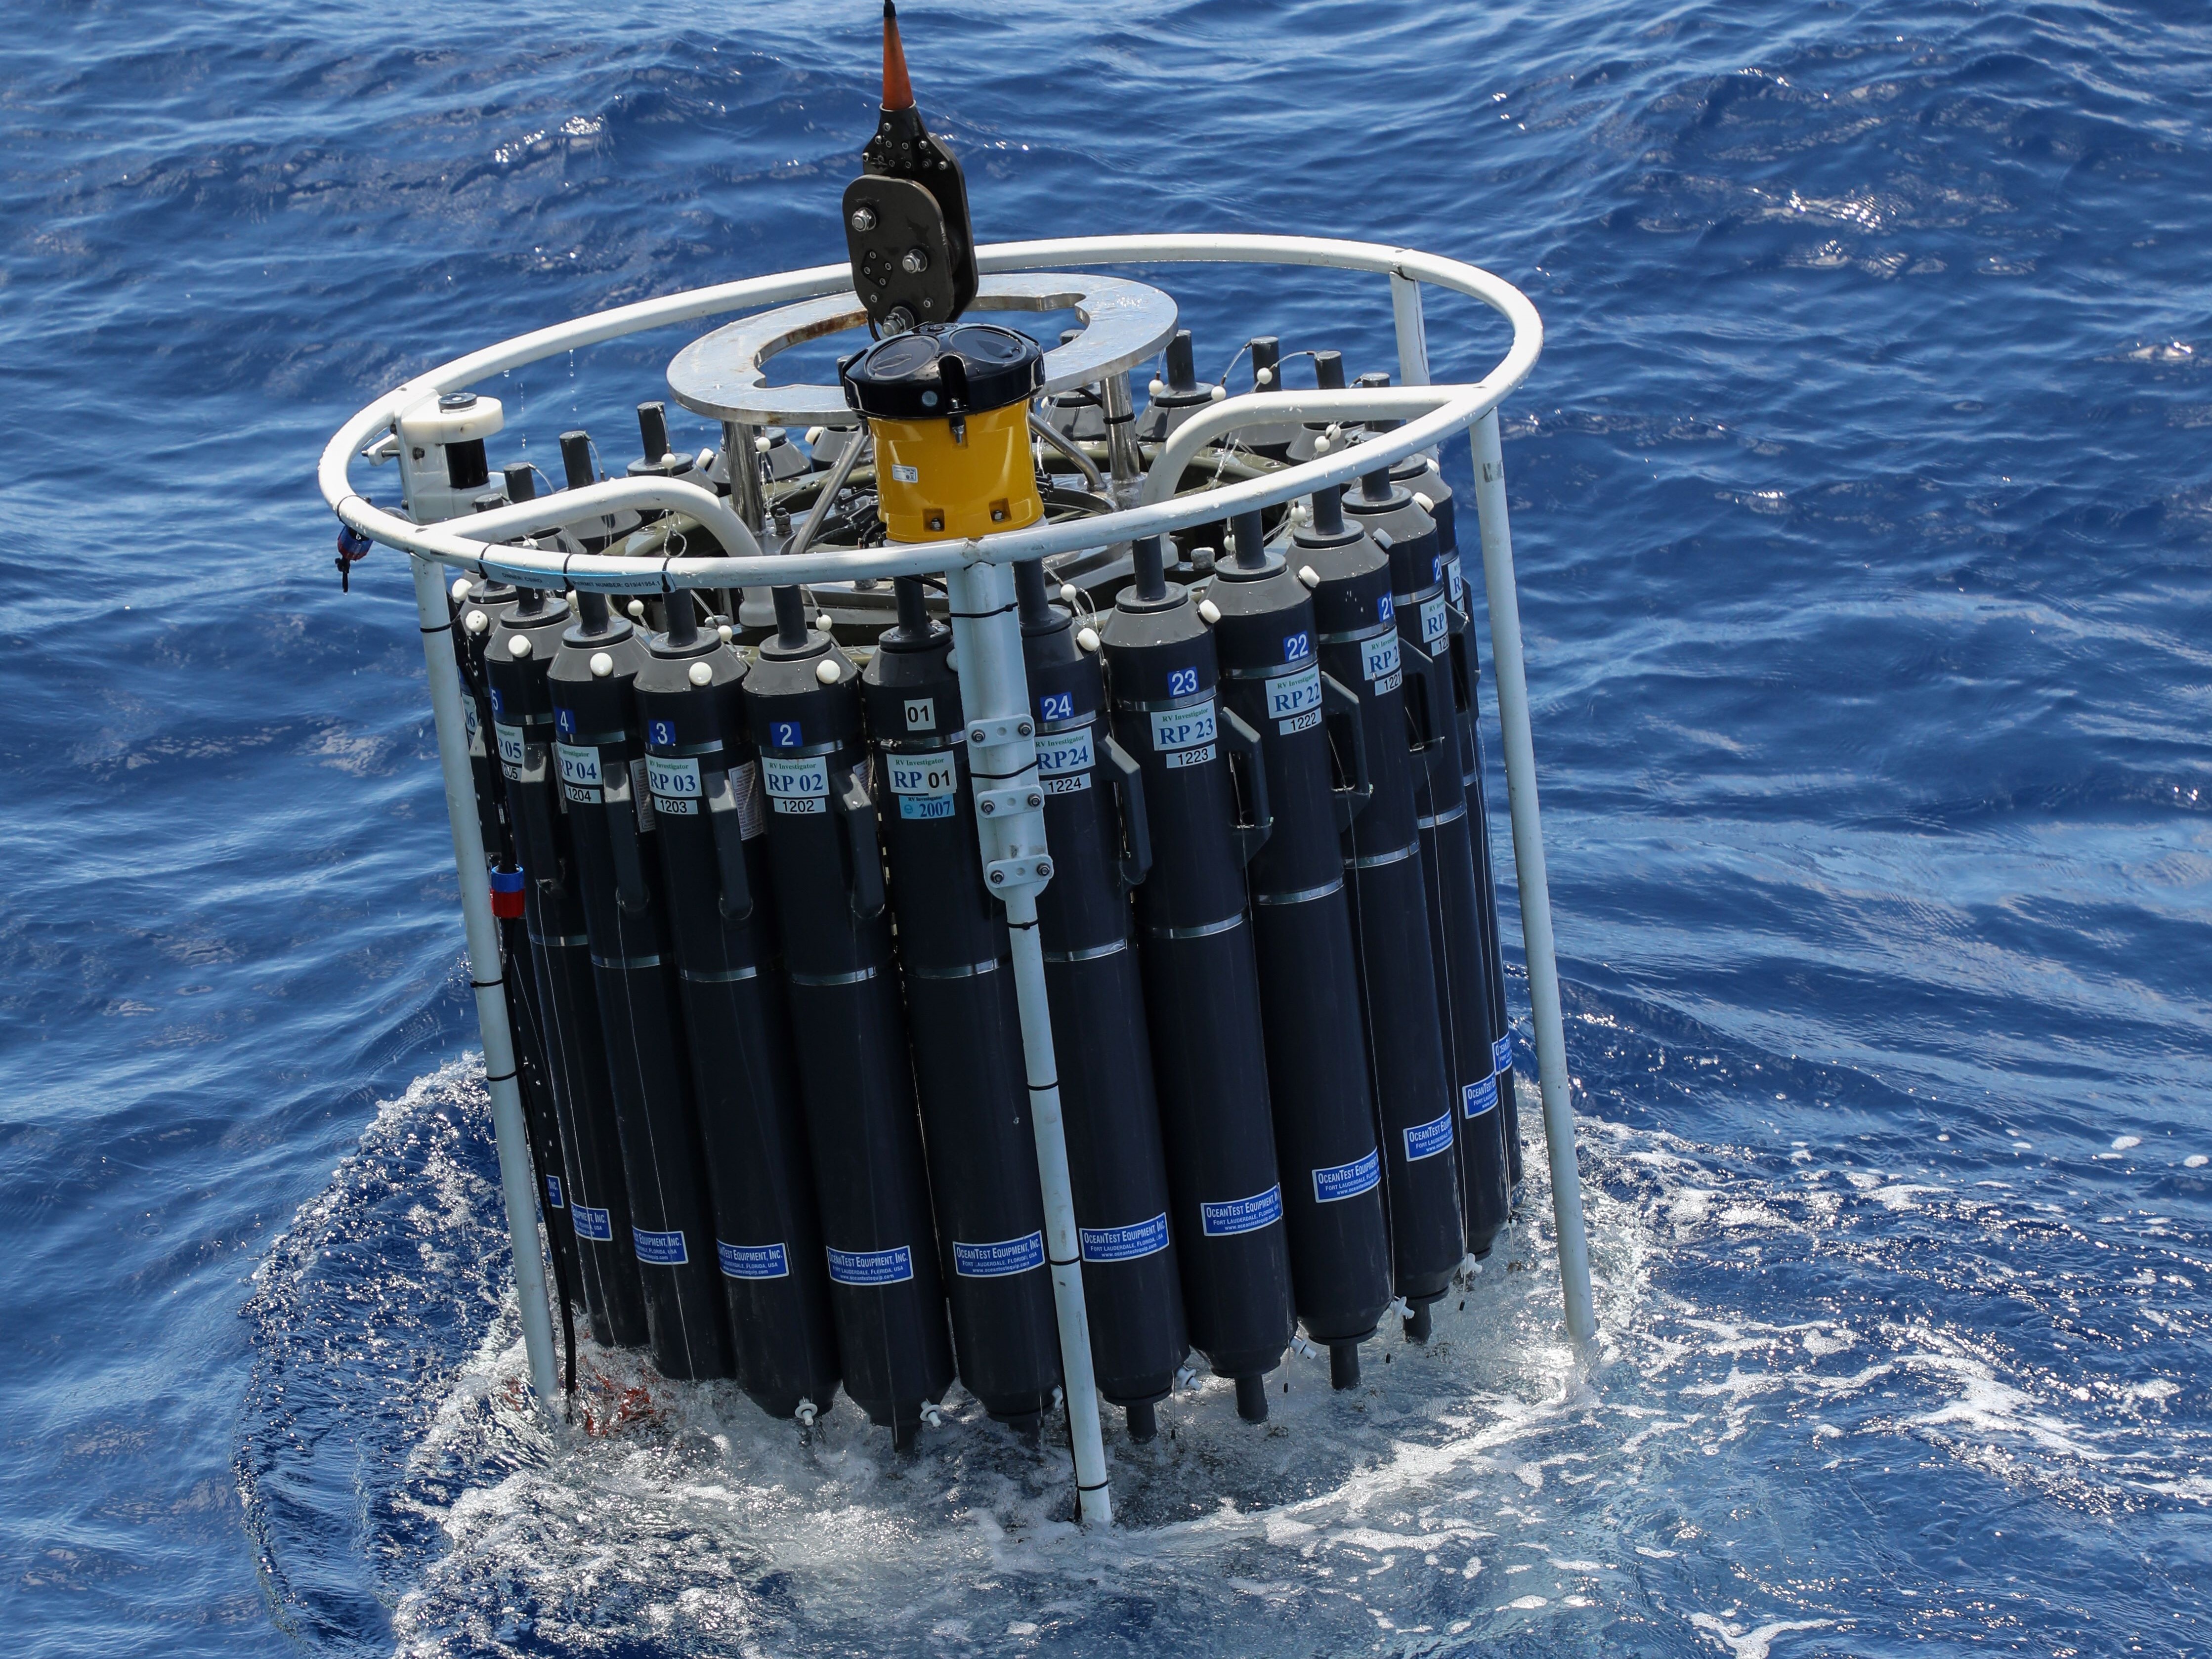 A large cylinder filled with black bottles is lowered into the ocean